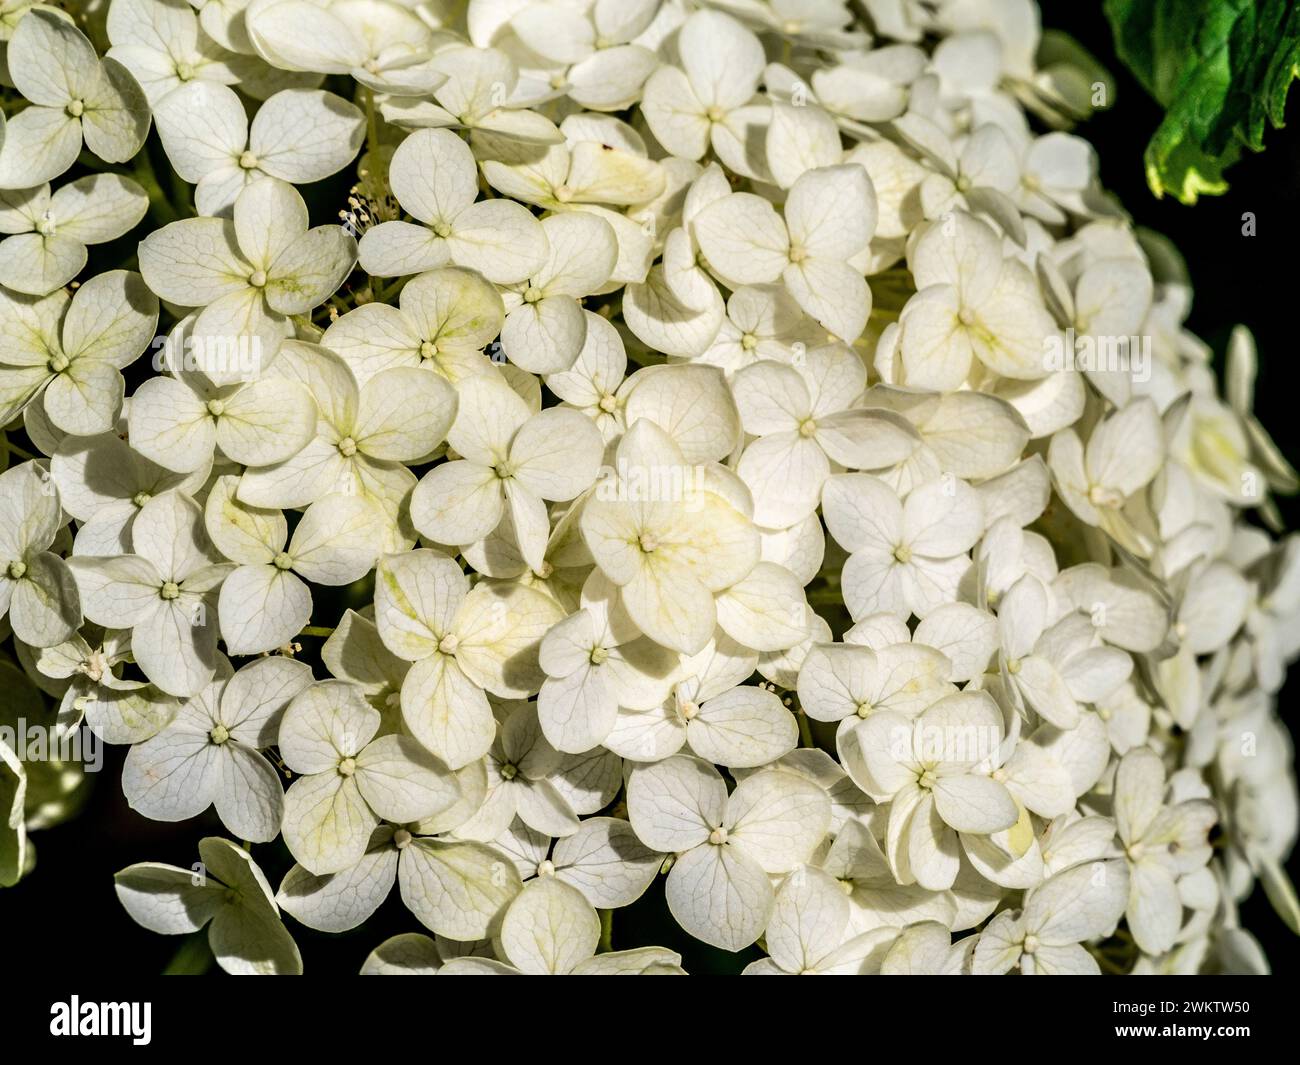 Close-up of a white flowerhead of Hydrangea arborescens Annabelle. Stock Photo